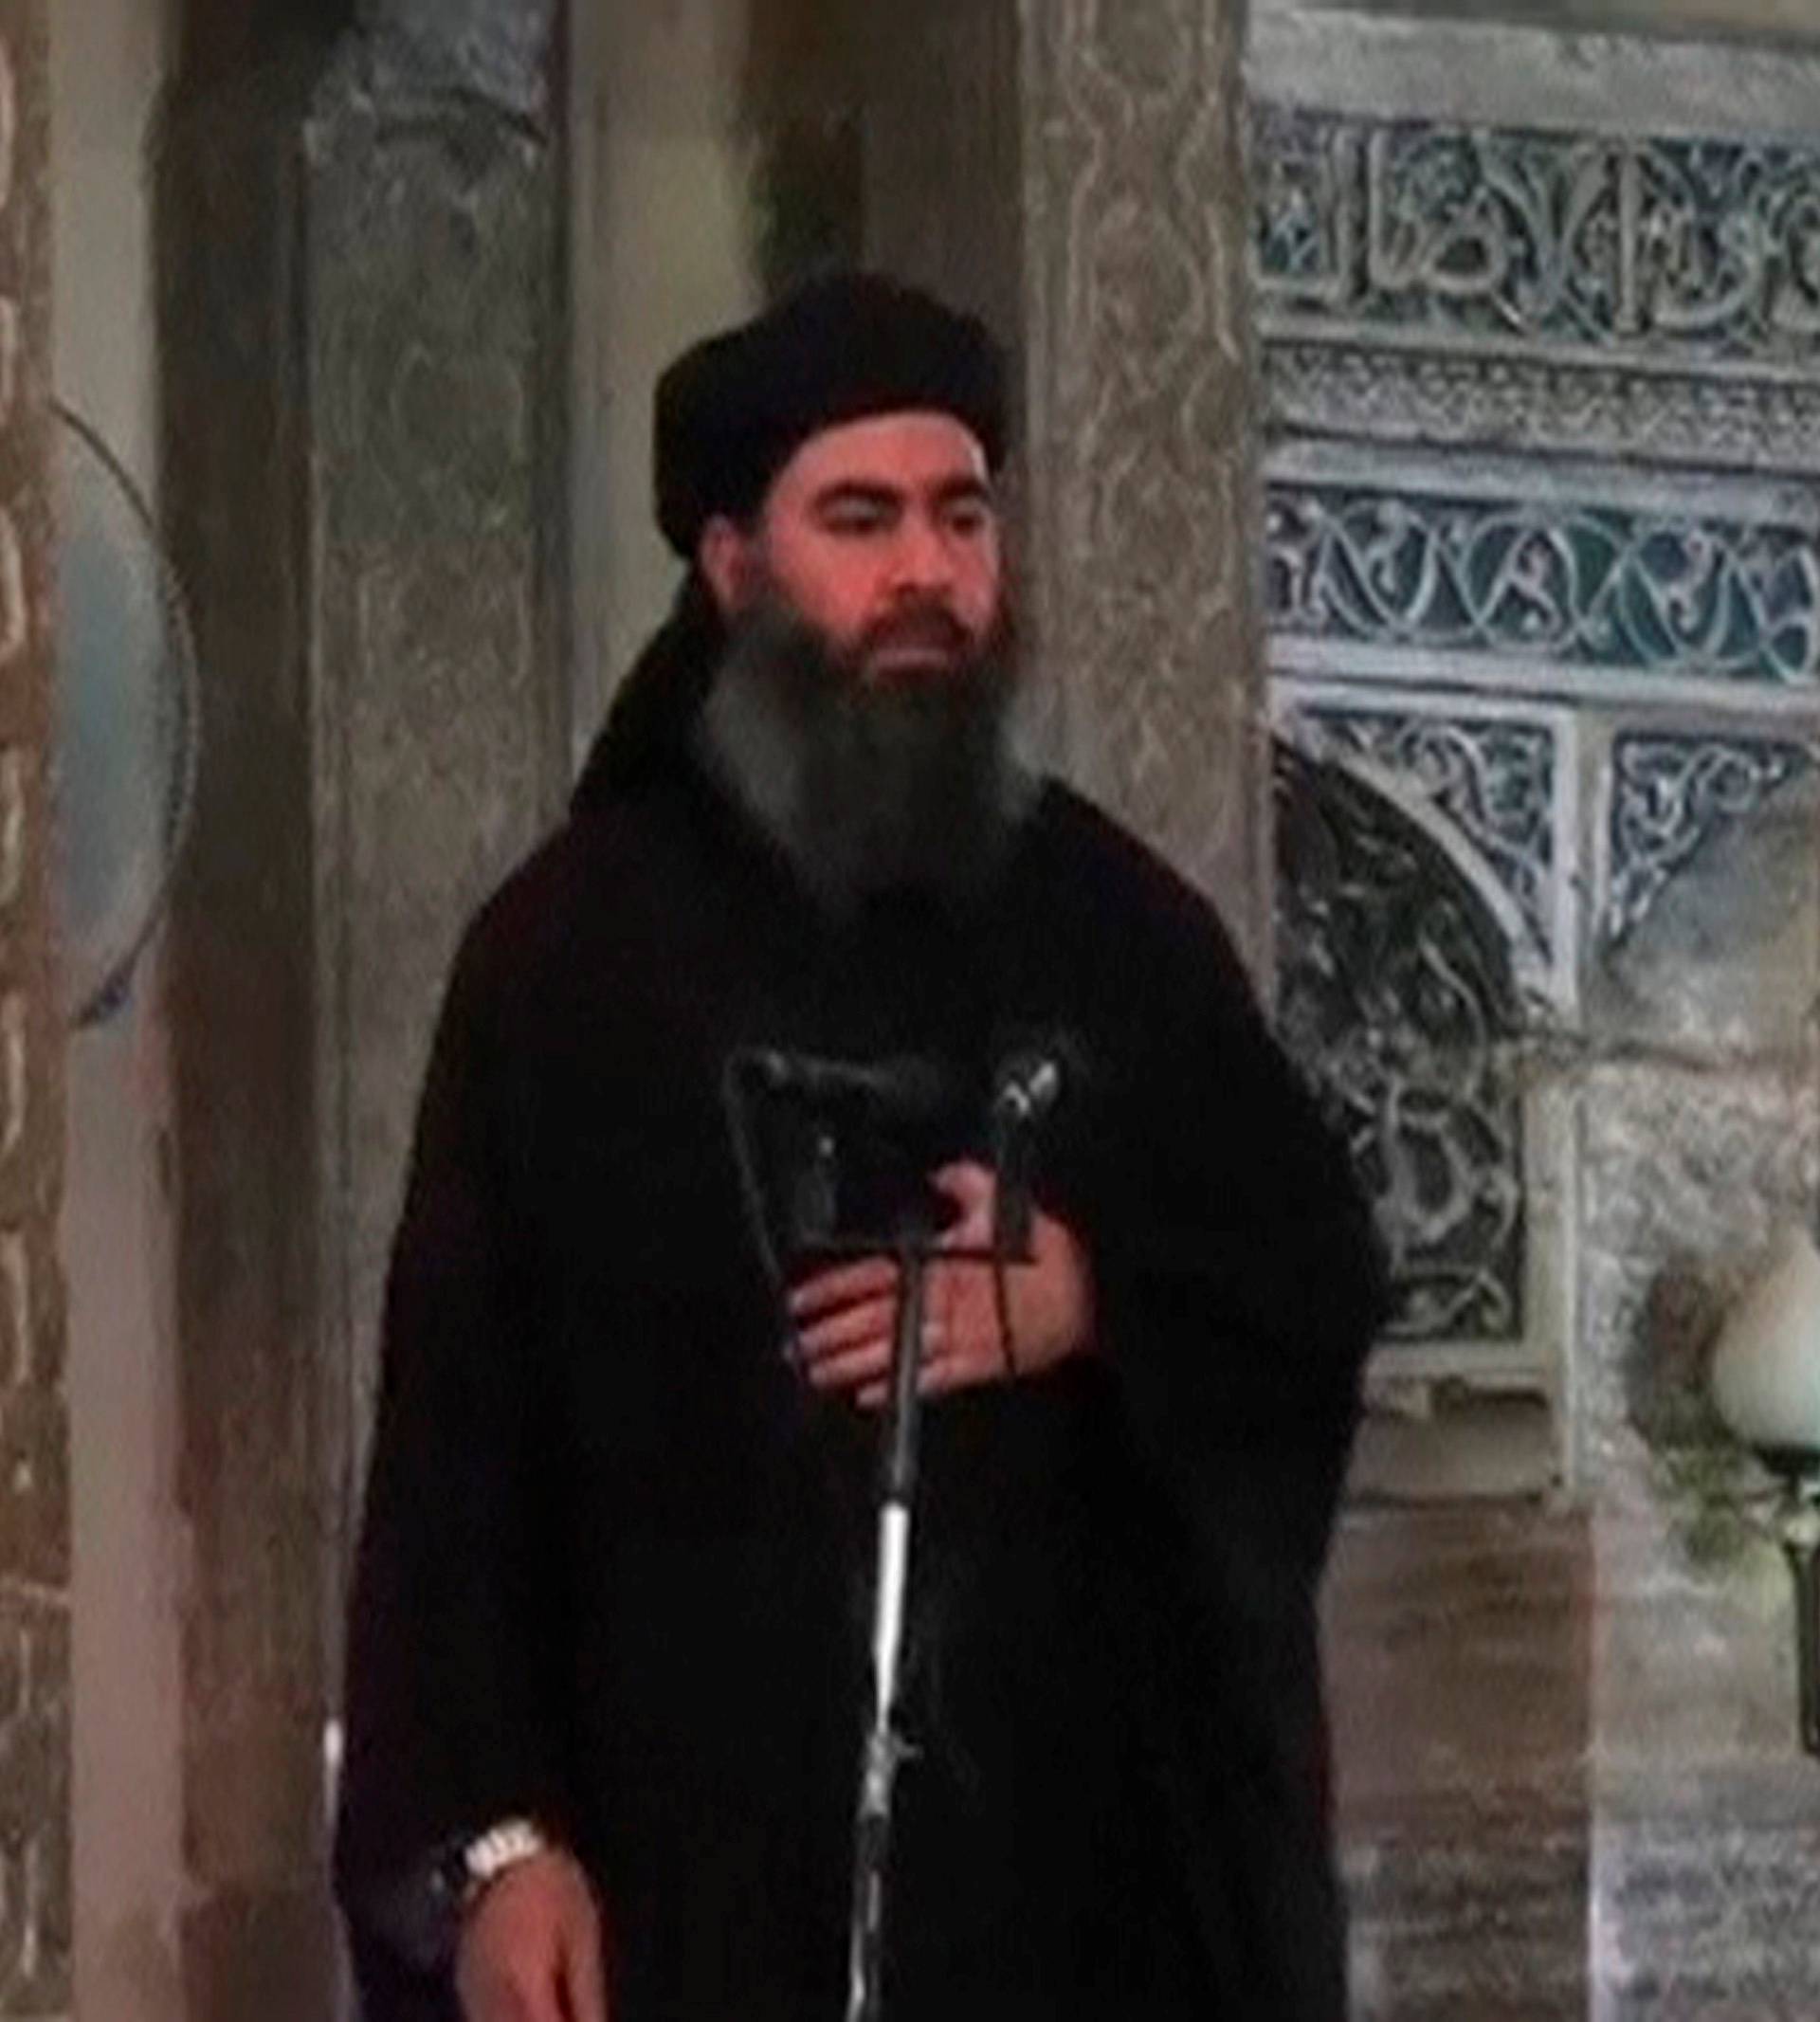 FILE PHOTO: Still image taken from video of a man purported to be the reclusive leader of the militant Islamic State Abu Bakr al-Baghdadi making what would be his first public appearance at a mosque in Mosul